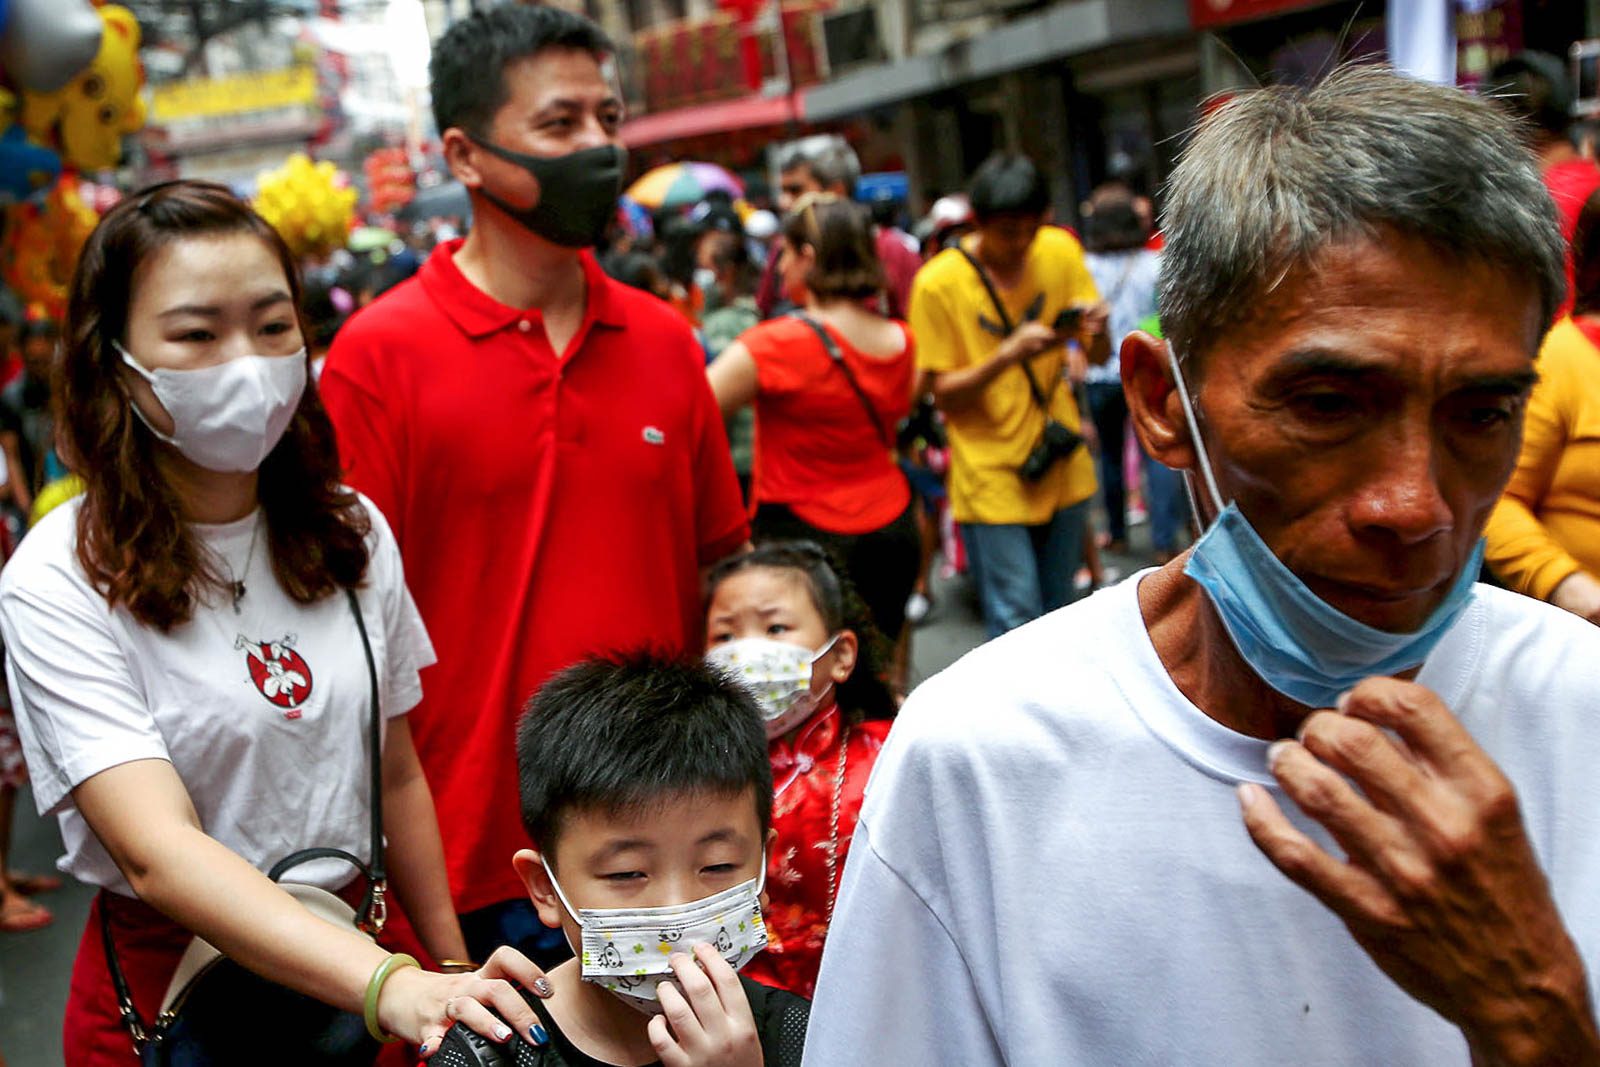 PRECAUTION. People are seen wearing face masks as a precautionary measure against the new coronavirus as they walk along the crowded Ongpin Street in Binondo, Manila. Photo by Inoue Jaena/Rappler  